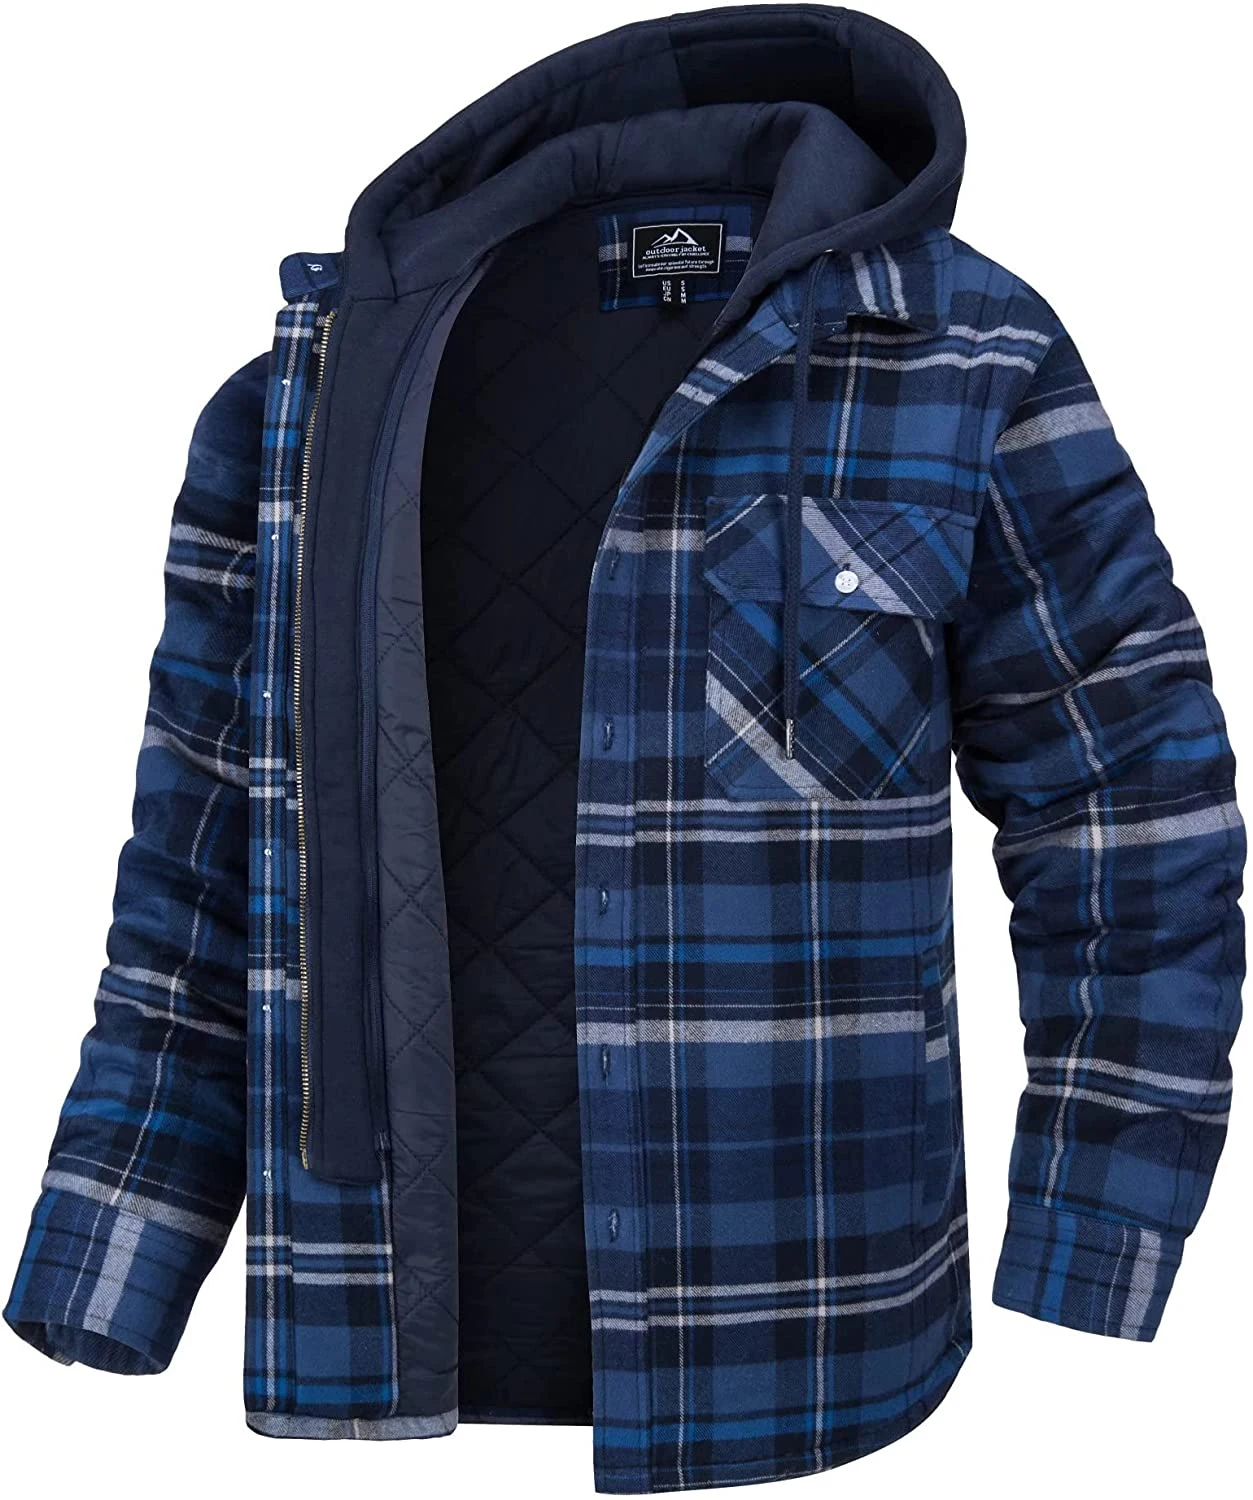 Jacket with Removable Hood Plaid Quilted Lined Winter Coats Thick Hoodie Outwear Men Fleece Shirts Men's Flannel Shirt